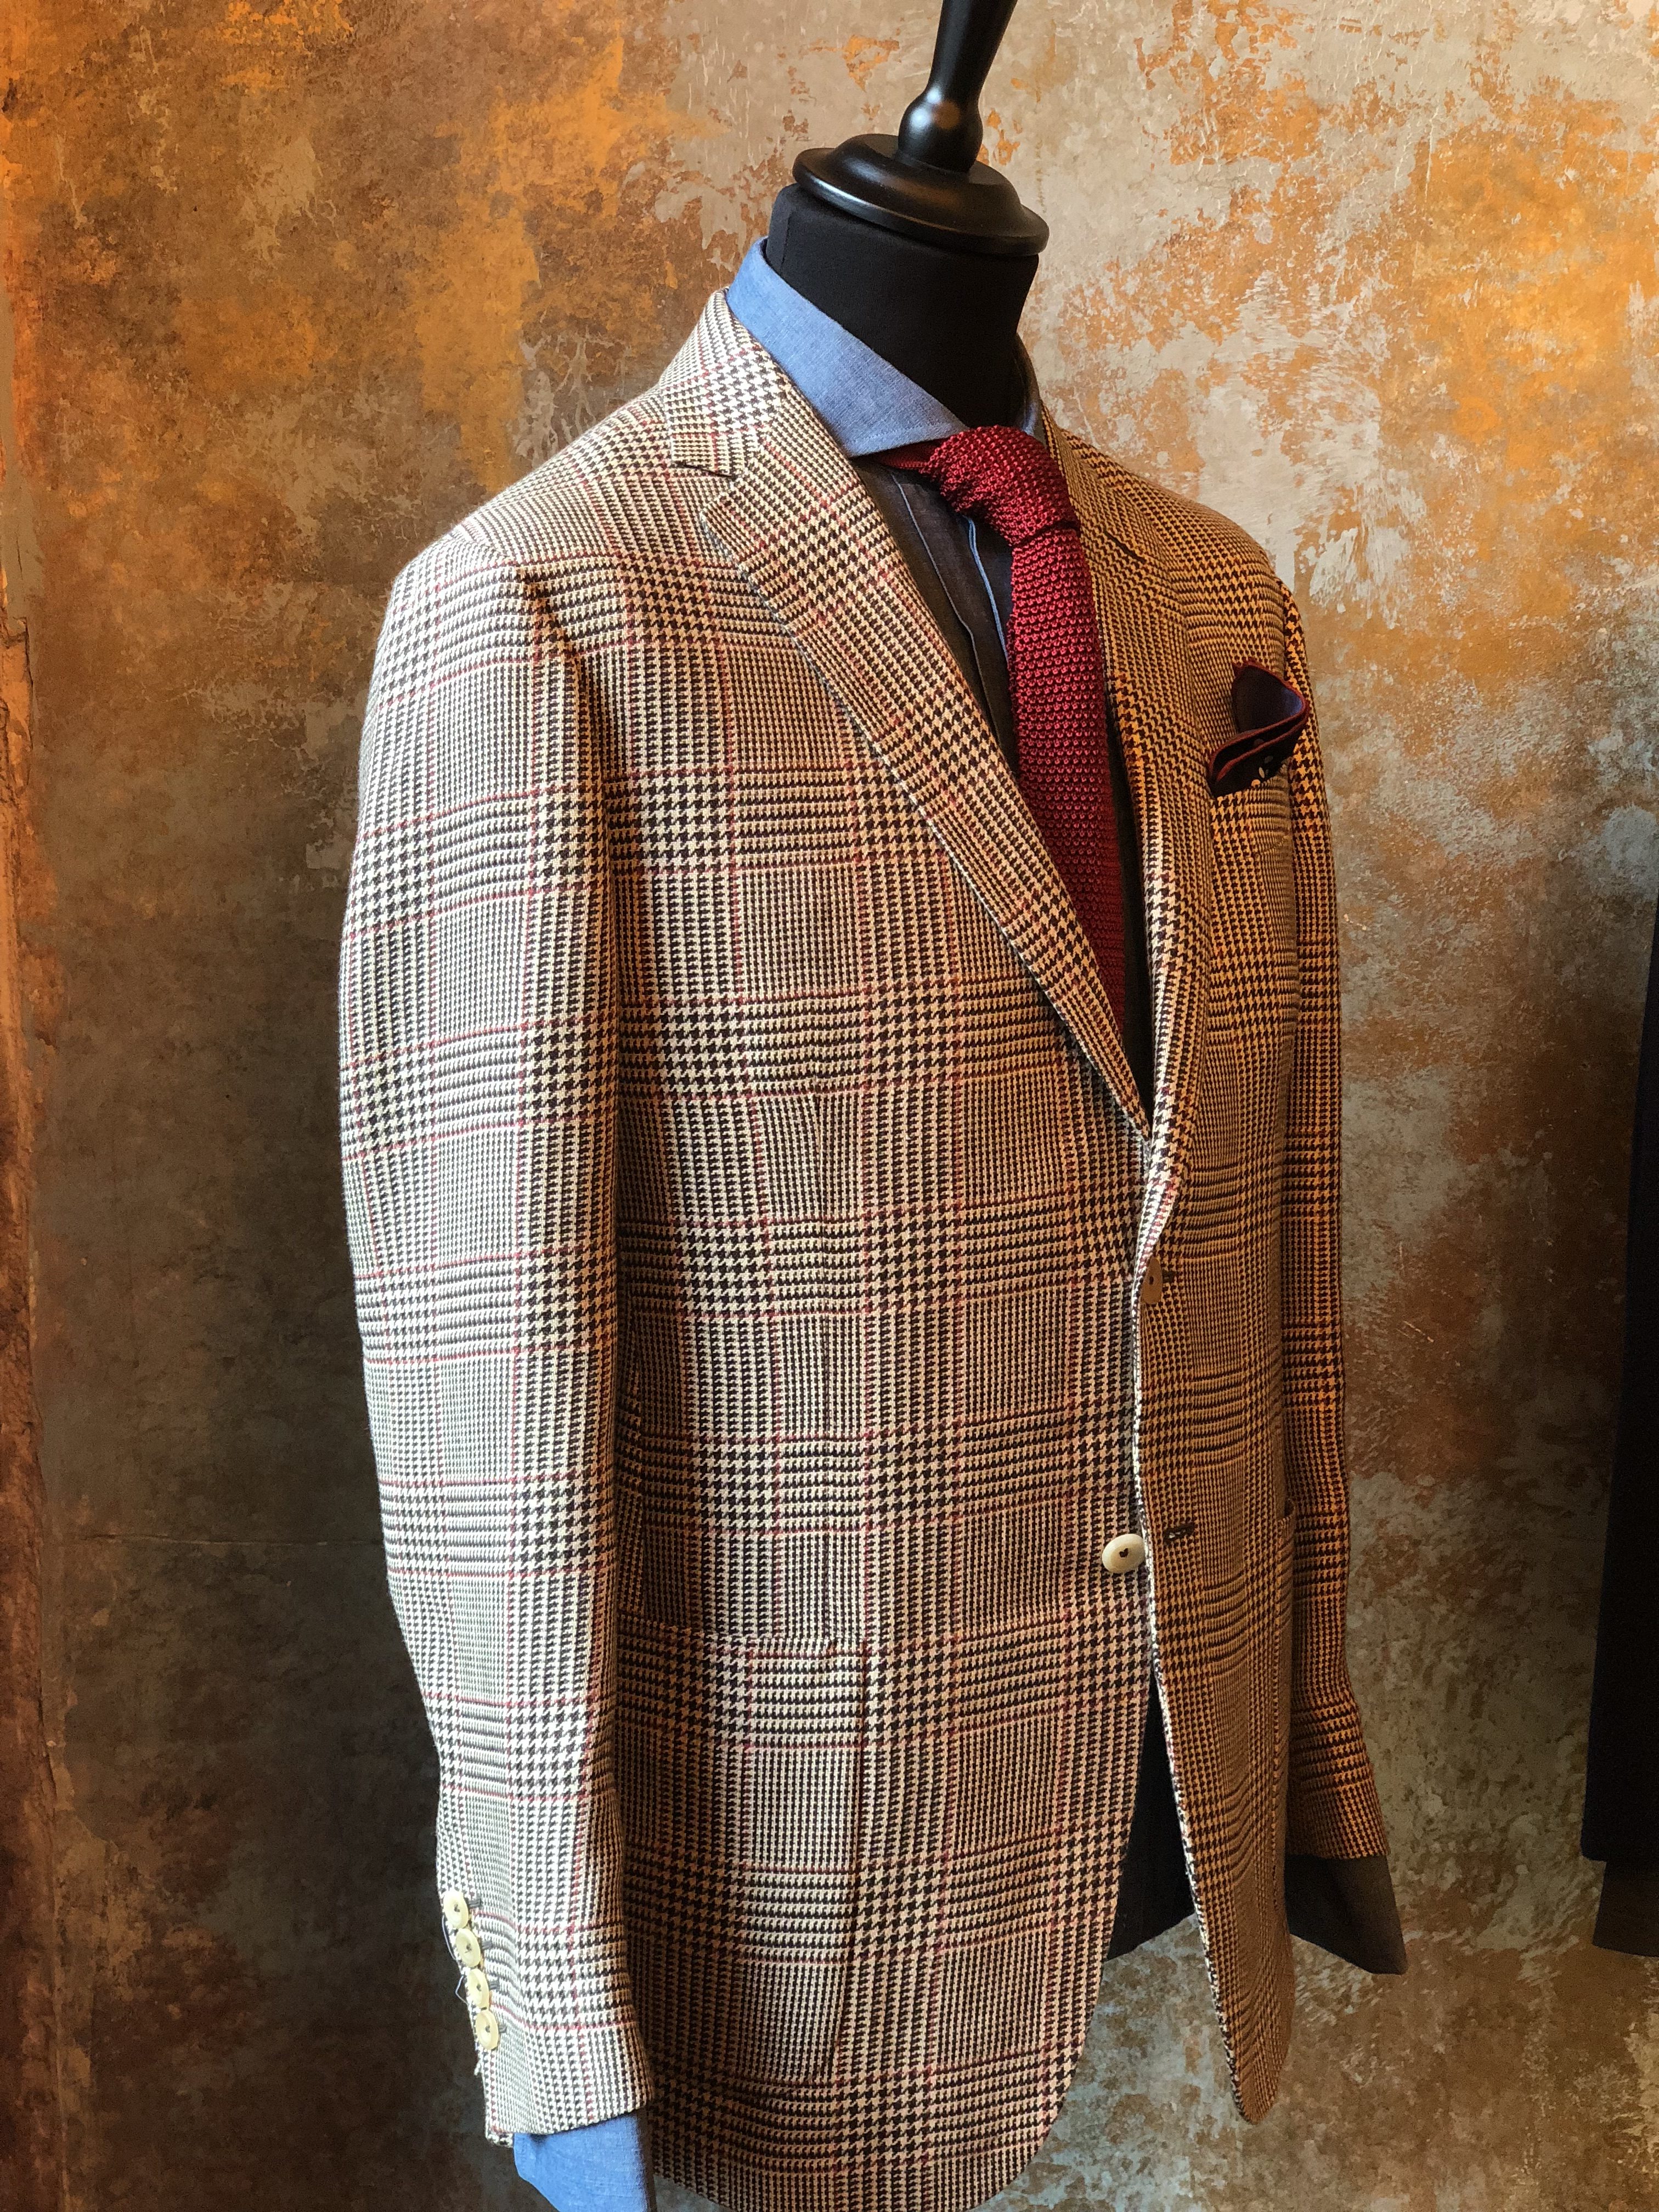 A Spring Suiting Romance with Chester Barrie